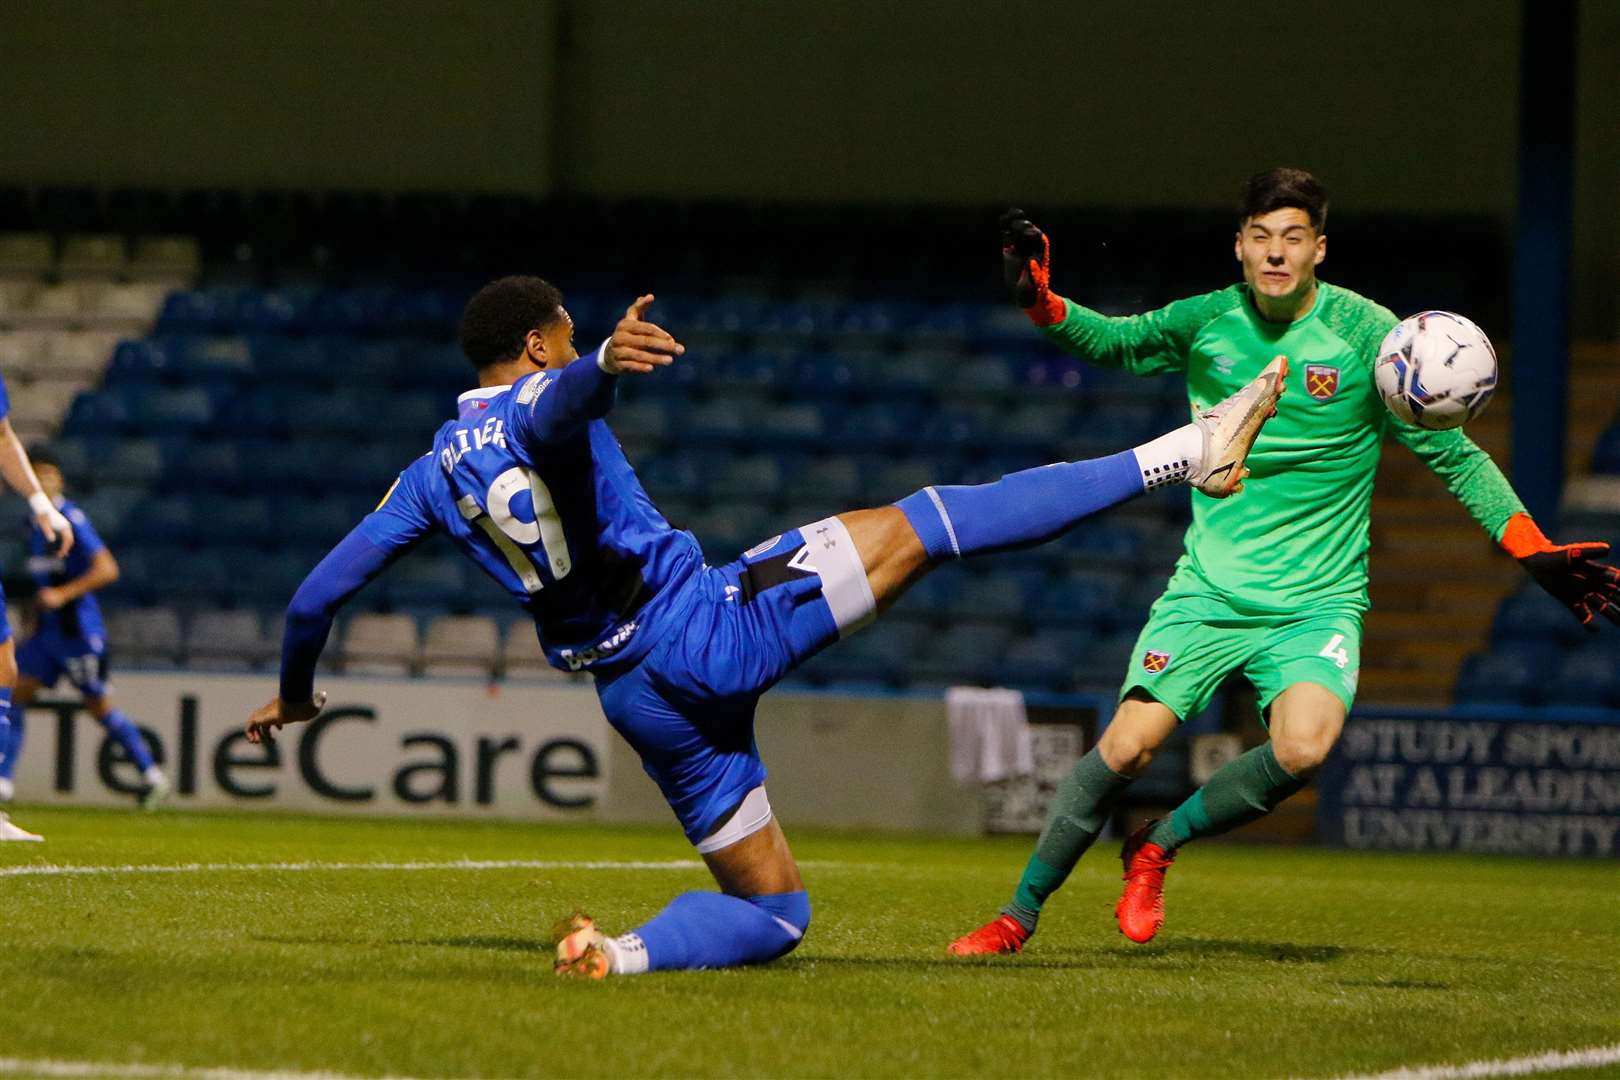 Gillingham striker Vadaine Oliver among the players wanted during the transfer window